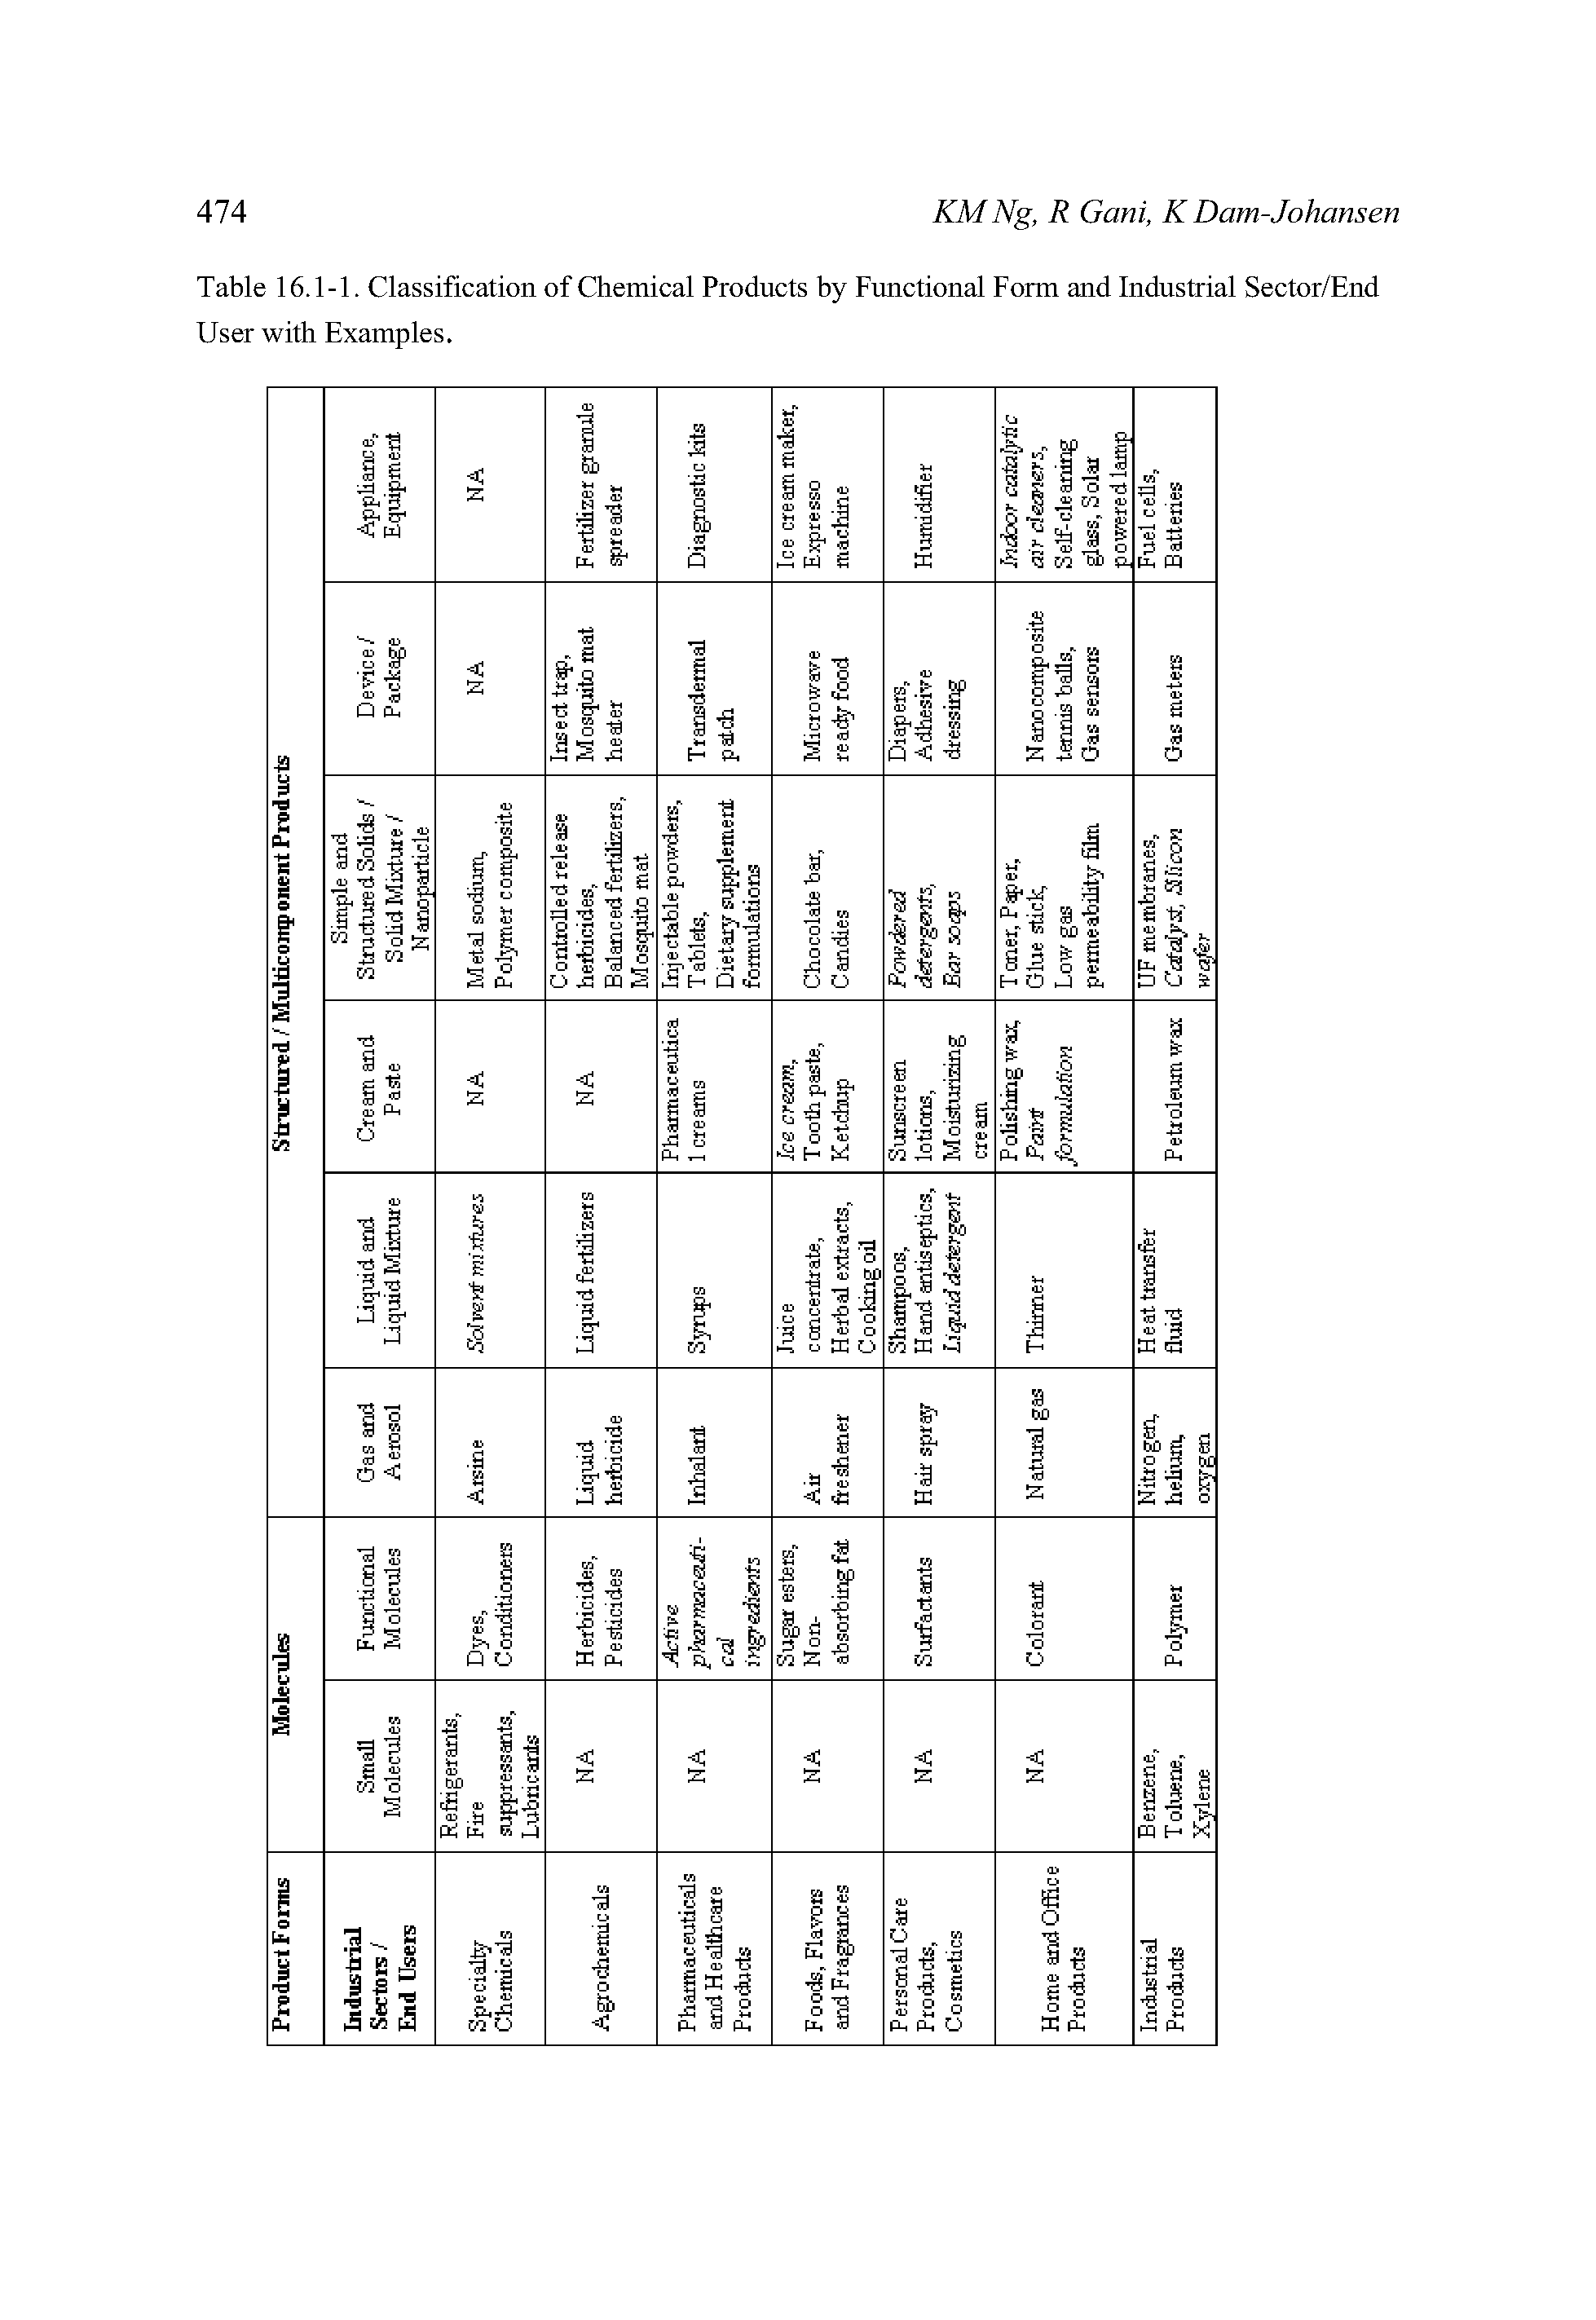 Table 16.1-1. Classification of Chemical Products by Functional Form and Industrial Sector/End User with Examples.